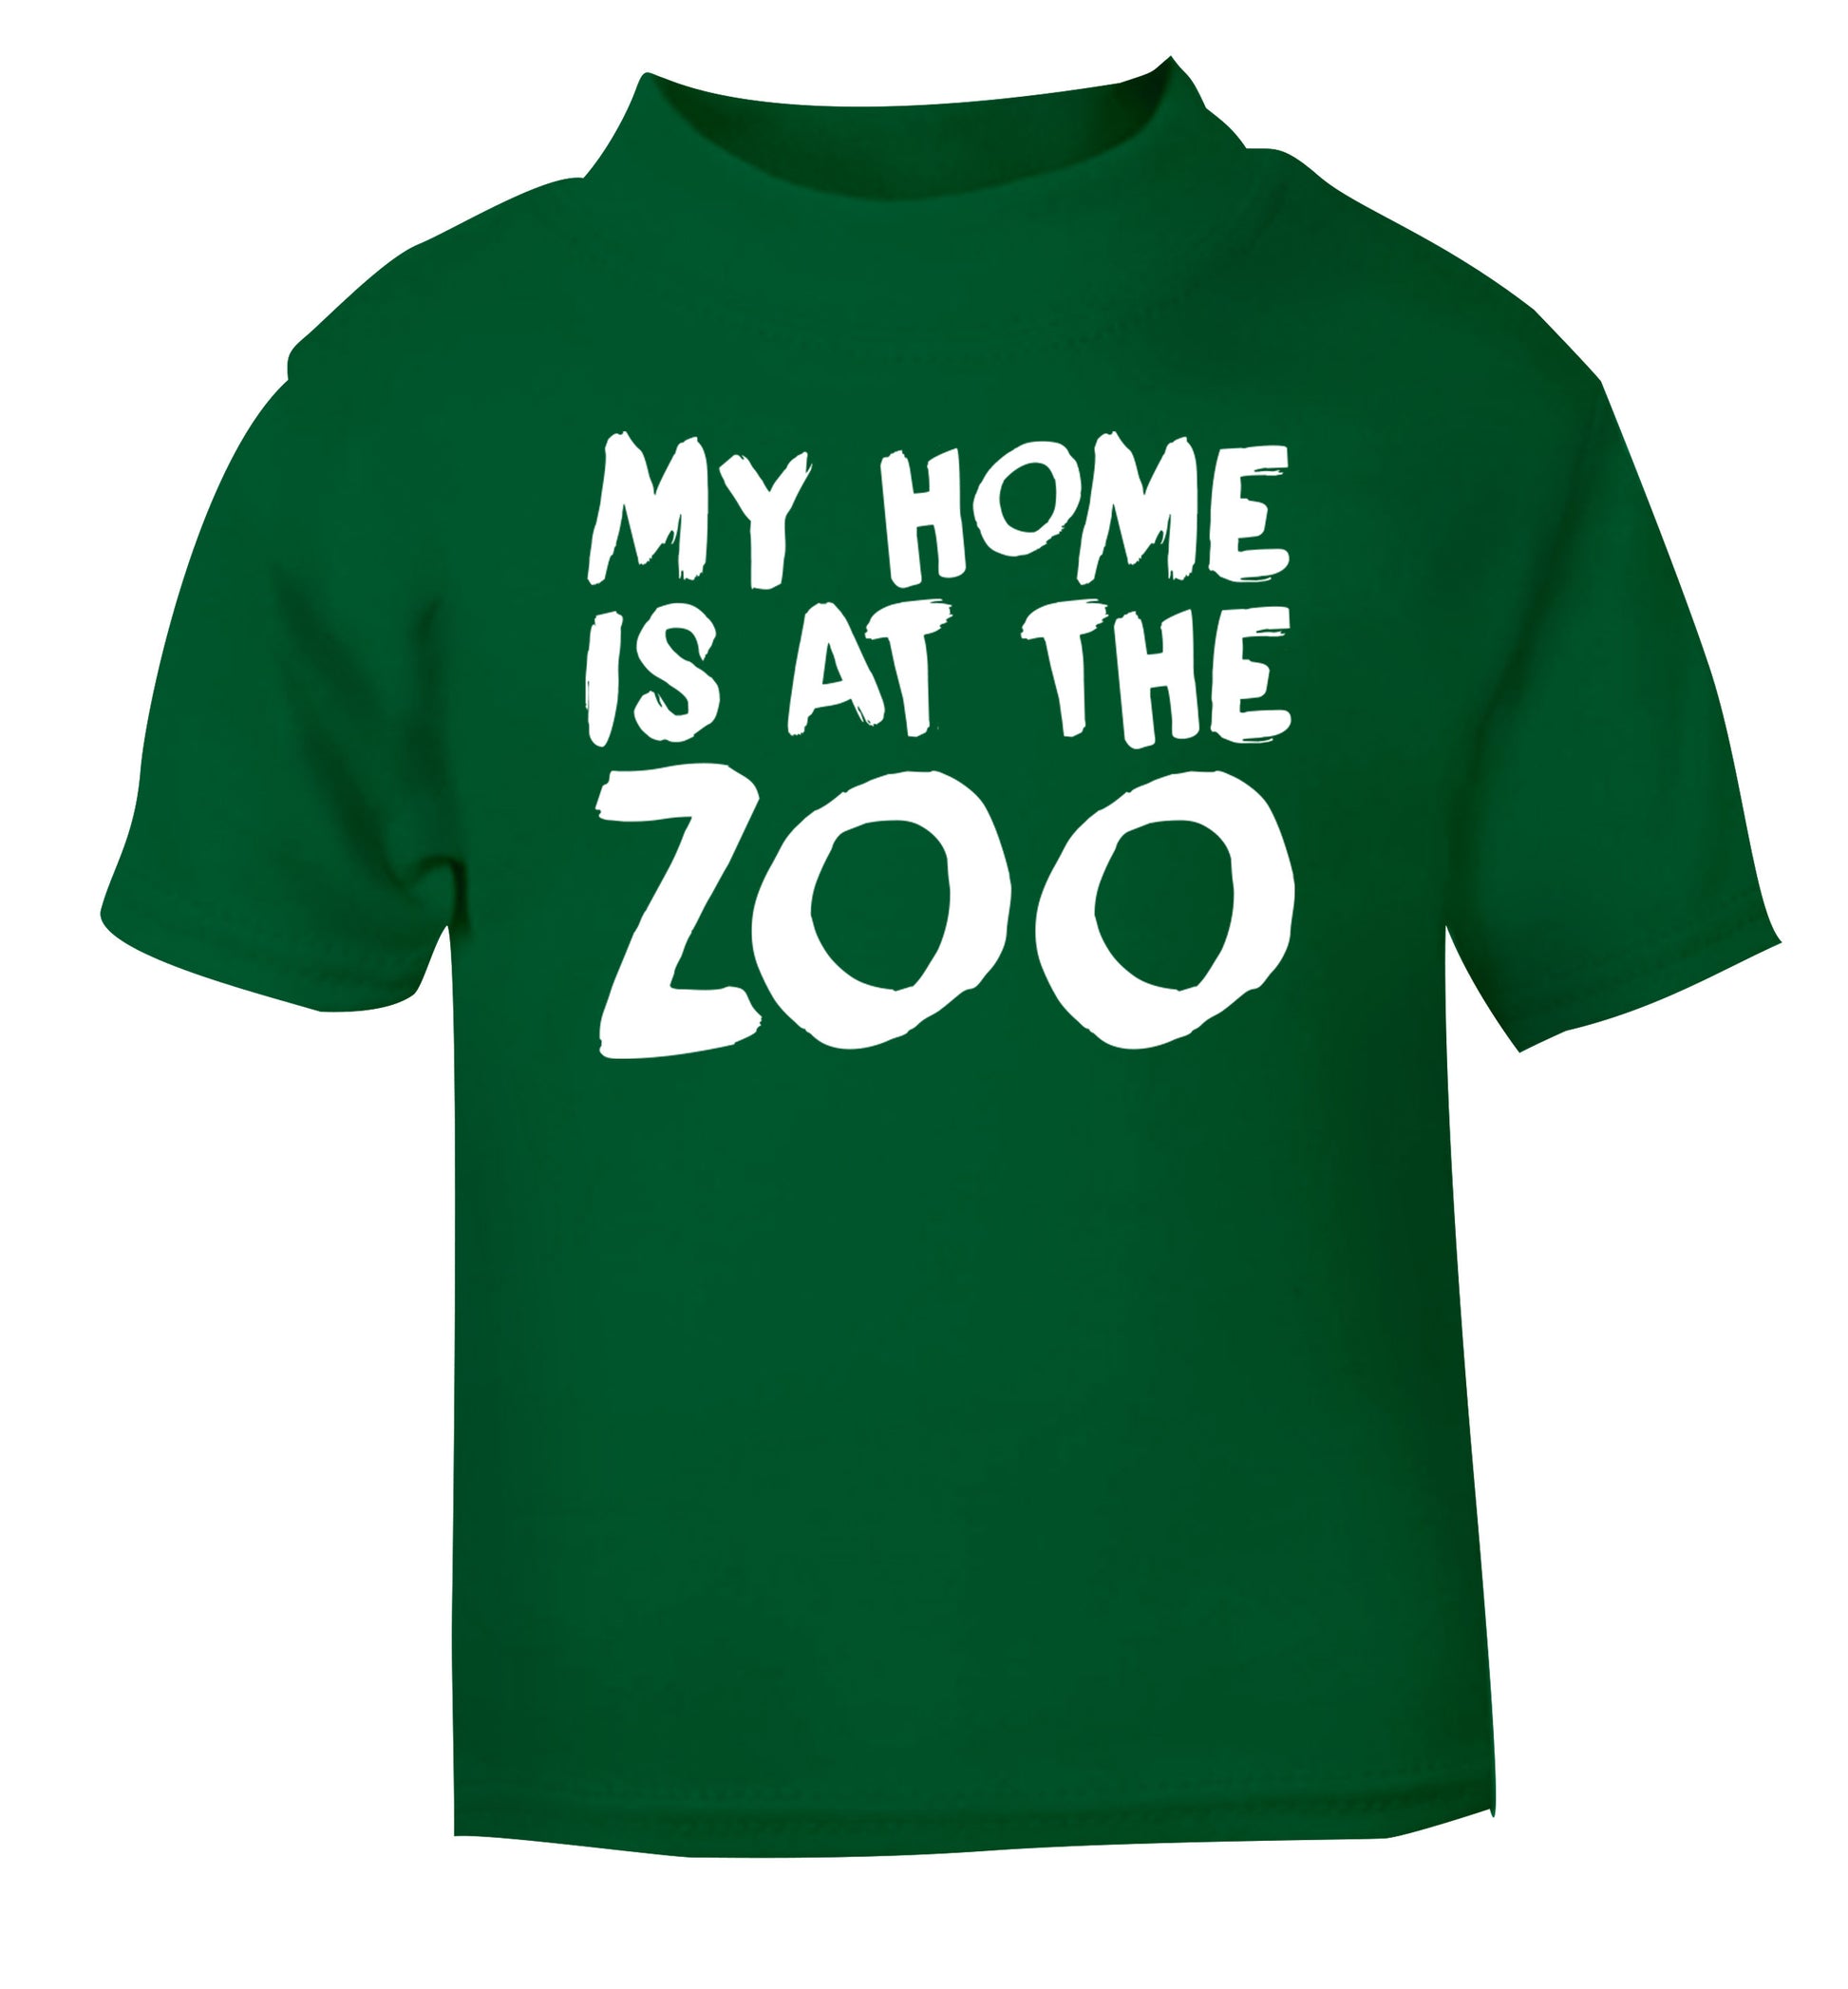 My home is at the zoo green Baby Toddler Tshirt 2 Years